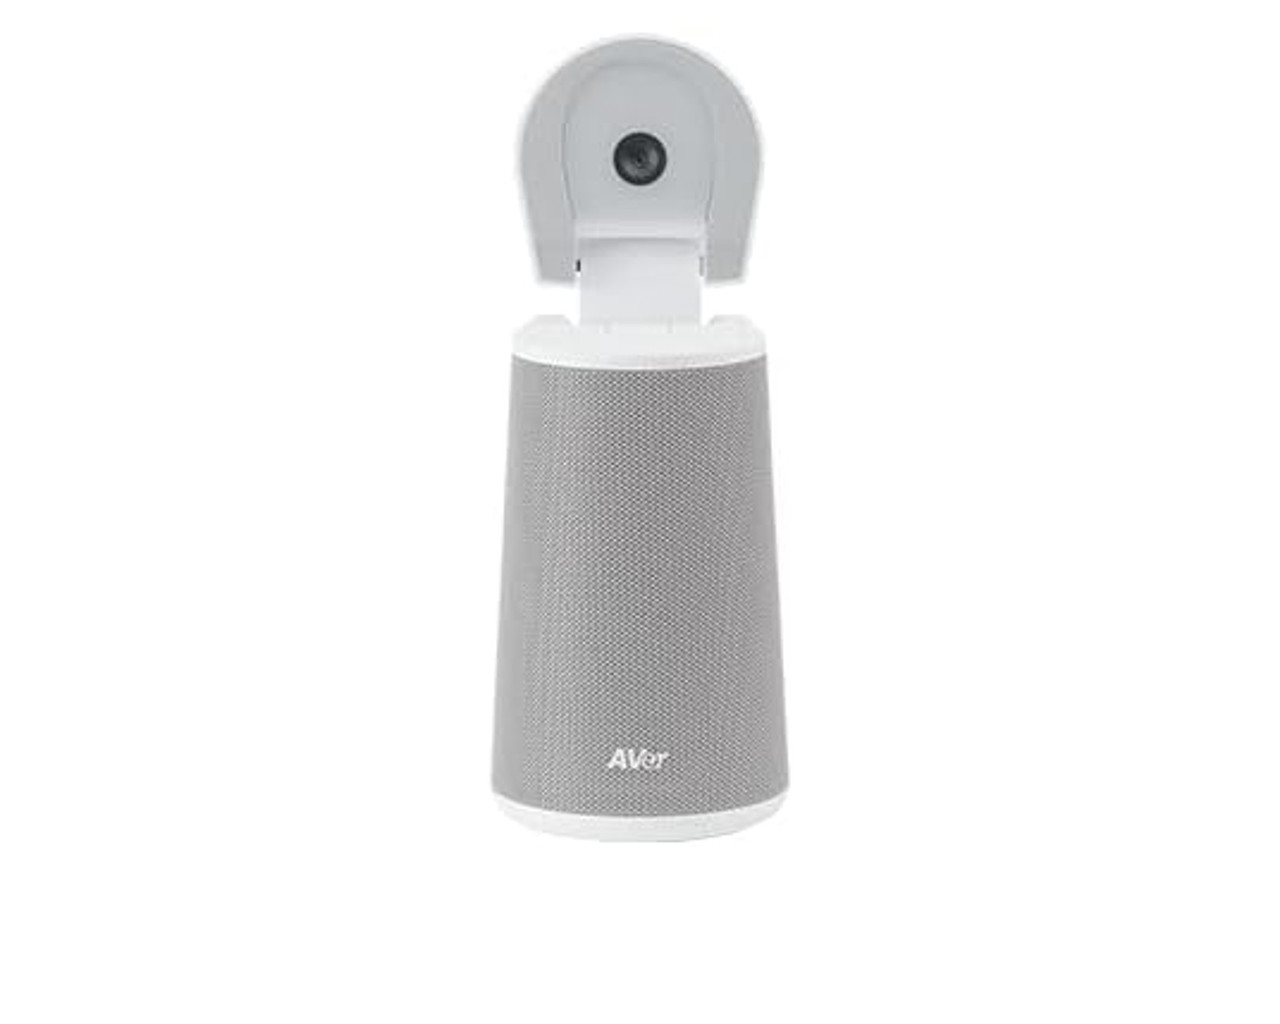 AVer A30 is an all-in-one video conference camera that enhances collaboration by combining a web camera, document camera, microphone, and speaker